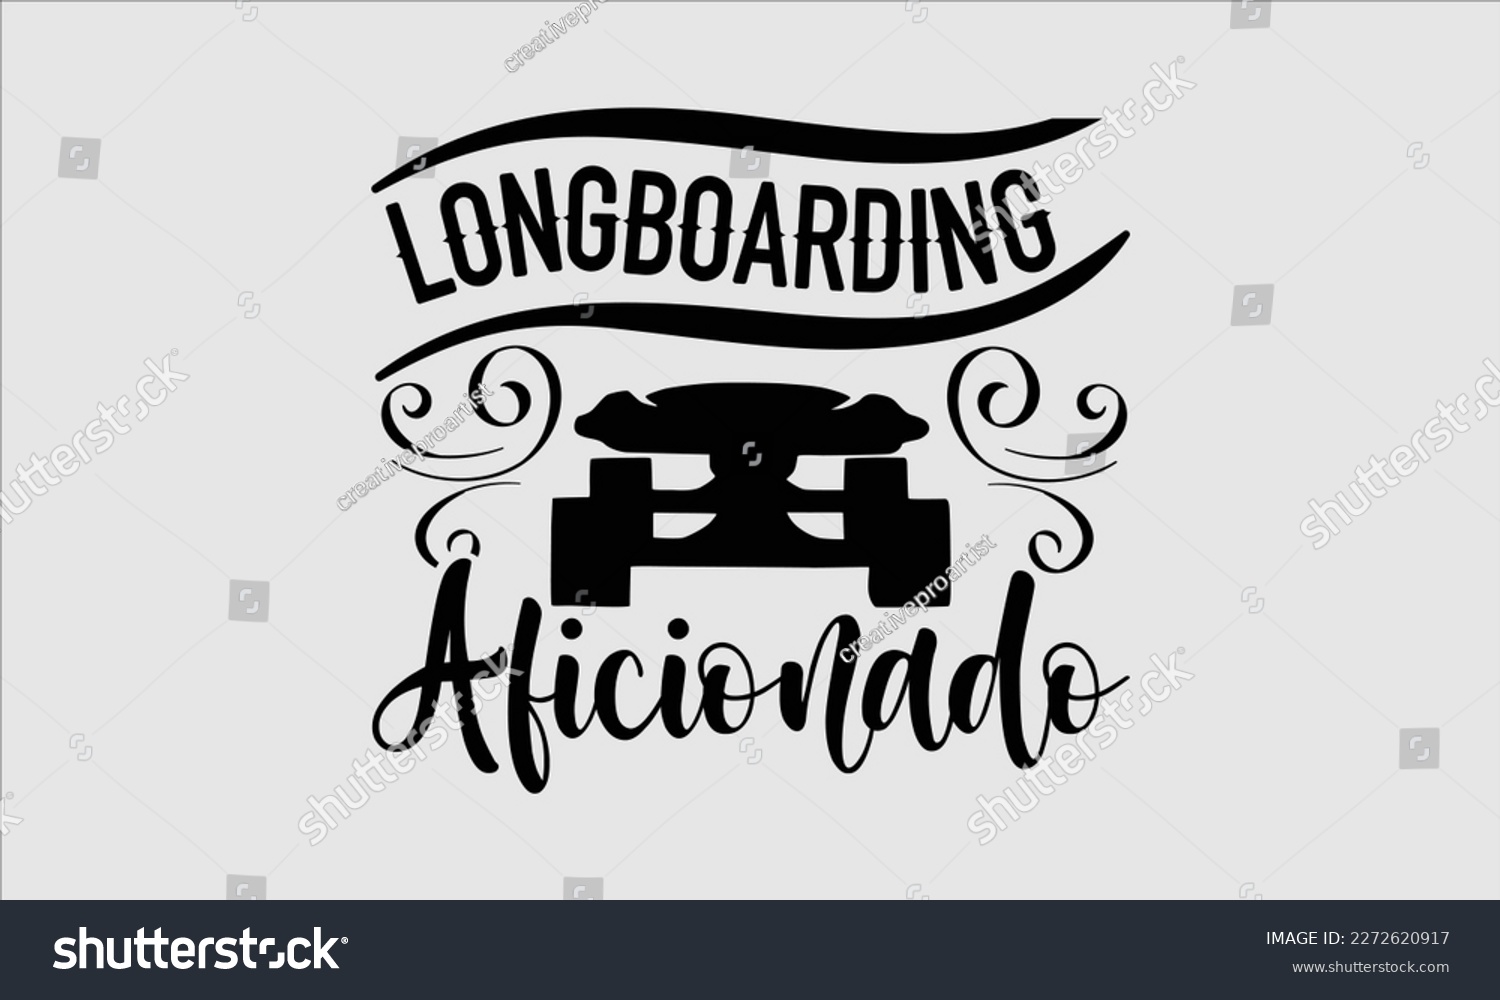 SVG of Longboarding aficionado- Longboarding T- shirt Design, Hand drawn lettering phrase, Illustration for prints on t-shirts and bags, posters, funny eps files, svg cricut svg